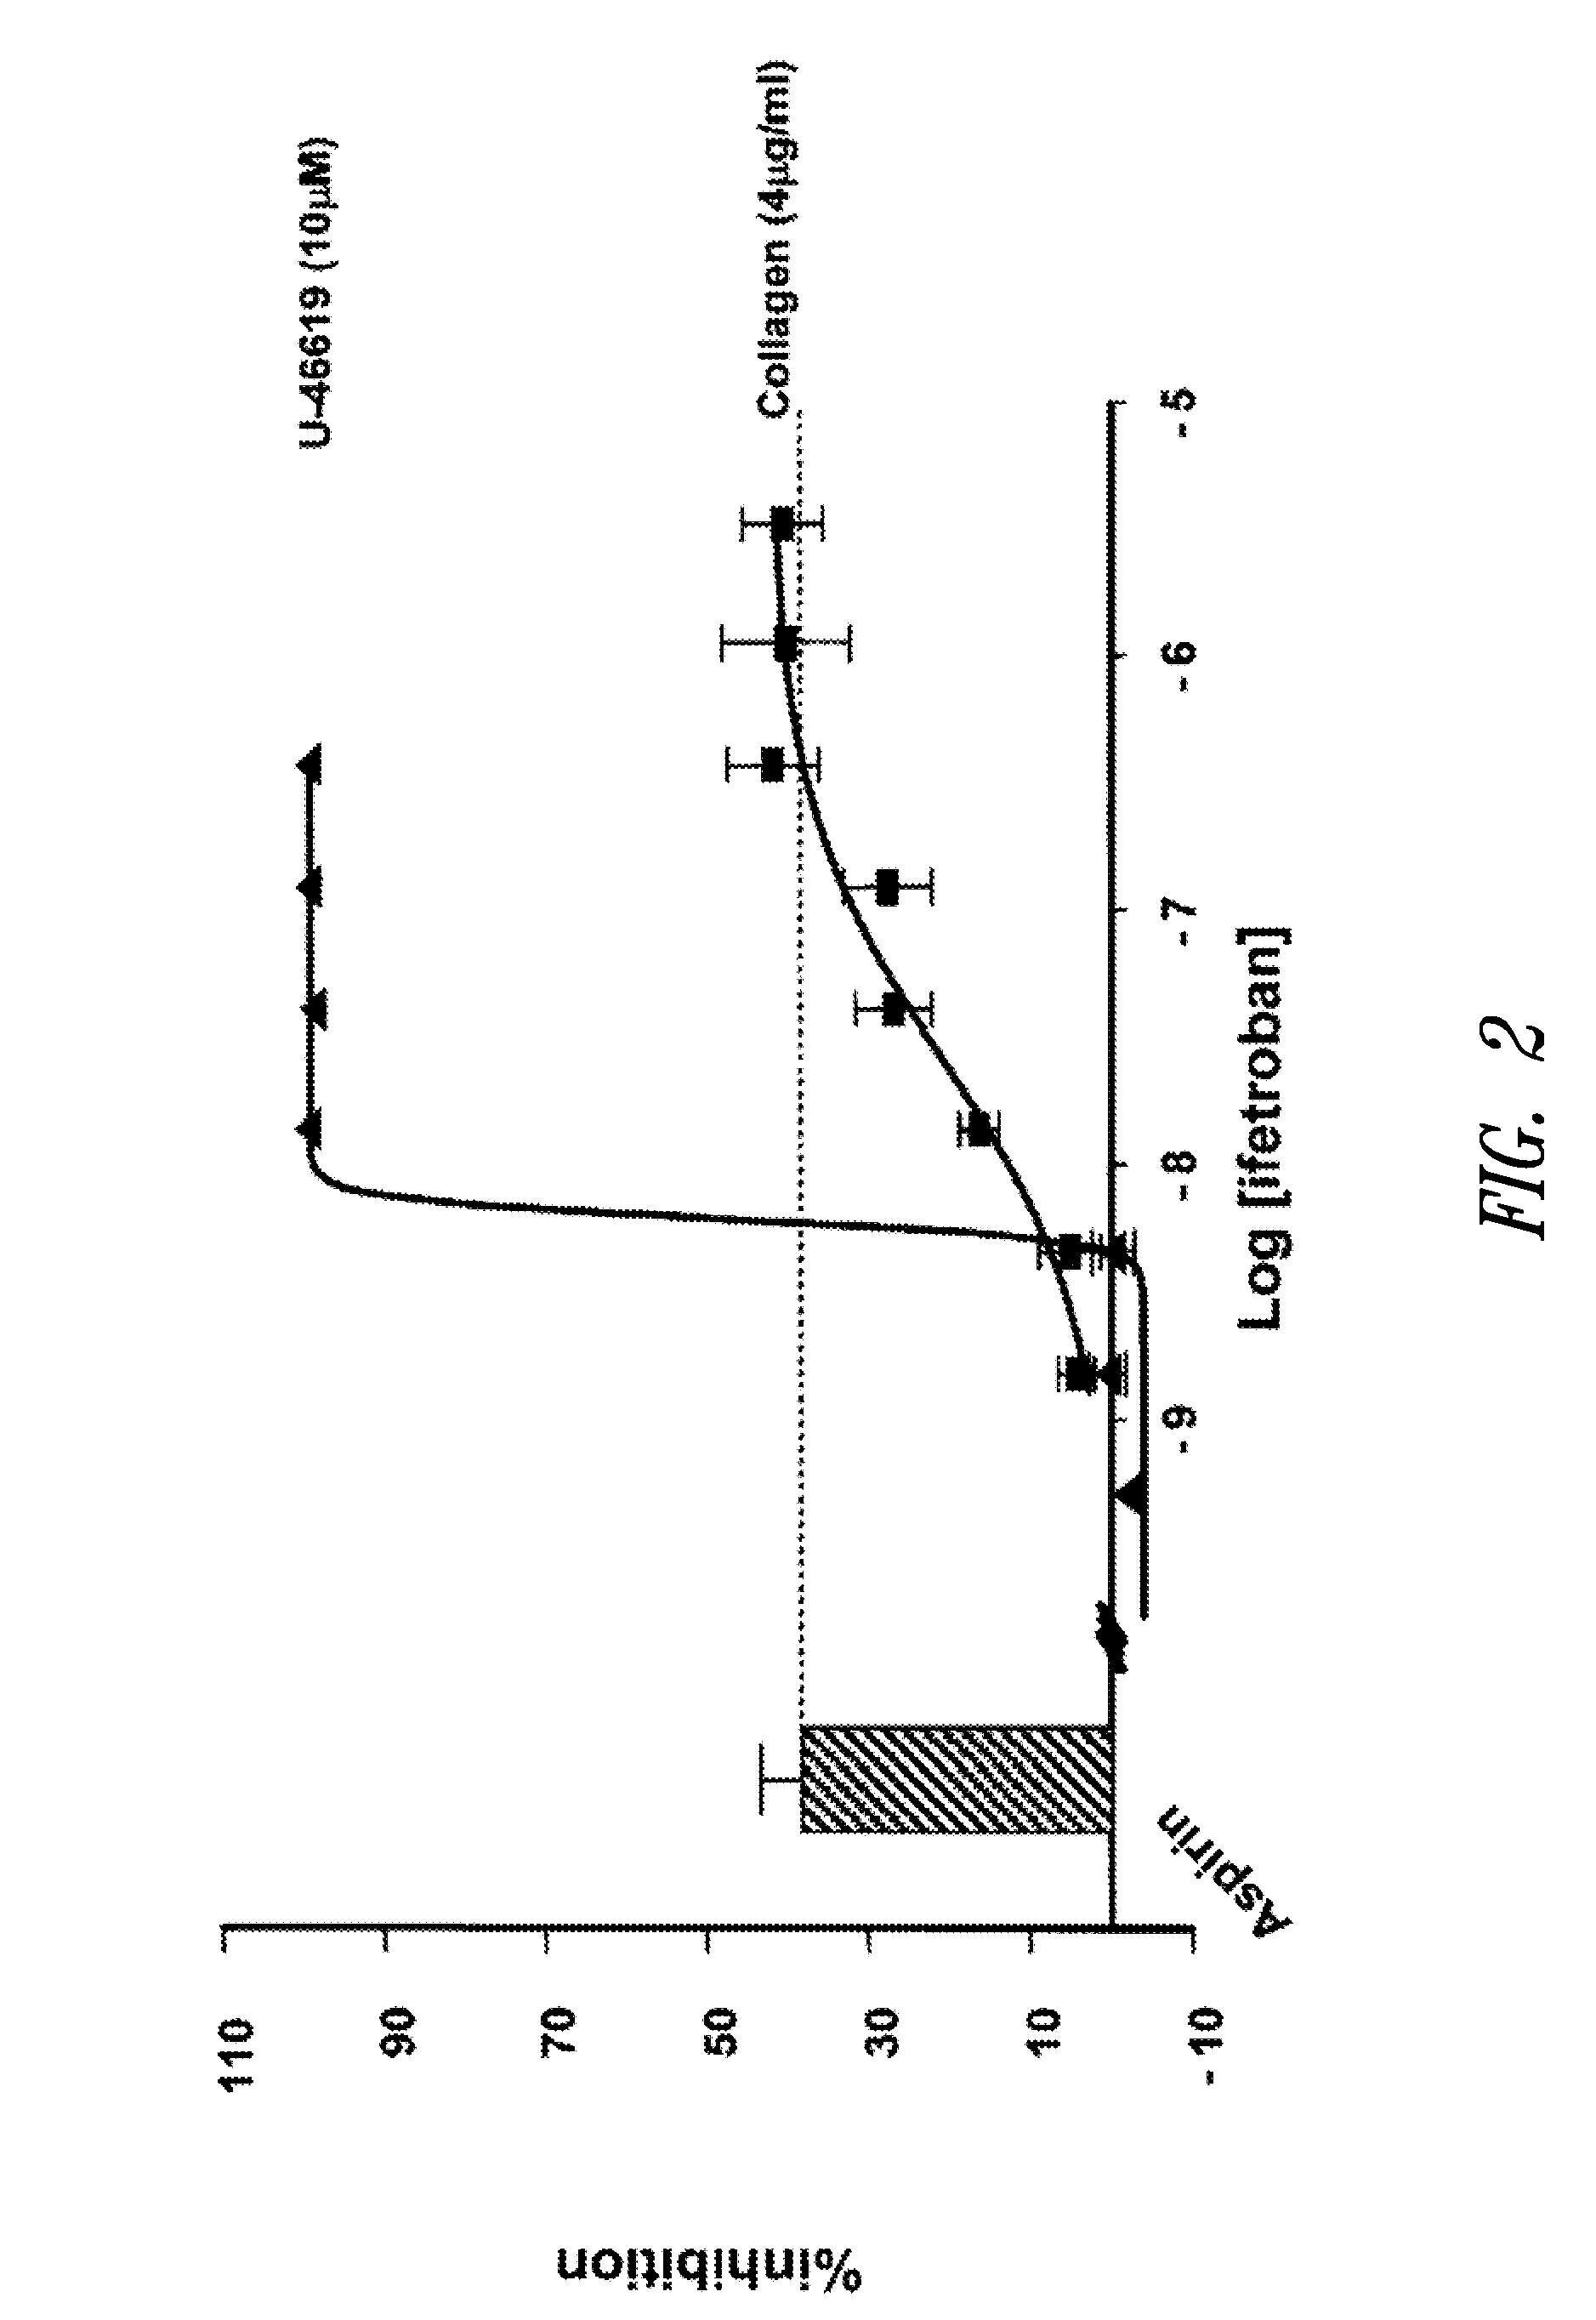 Unit dose formulations and methods of treating and preventing thrombosis with thromboxane receptor antagonists